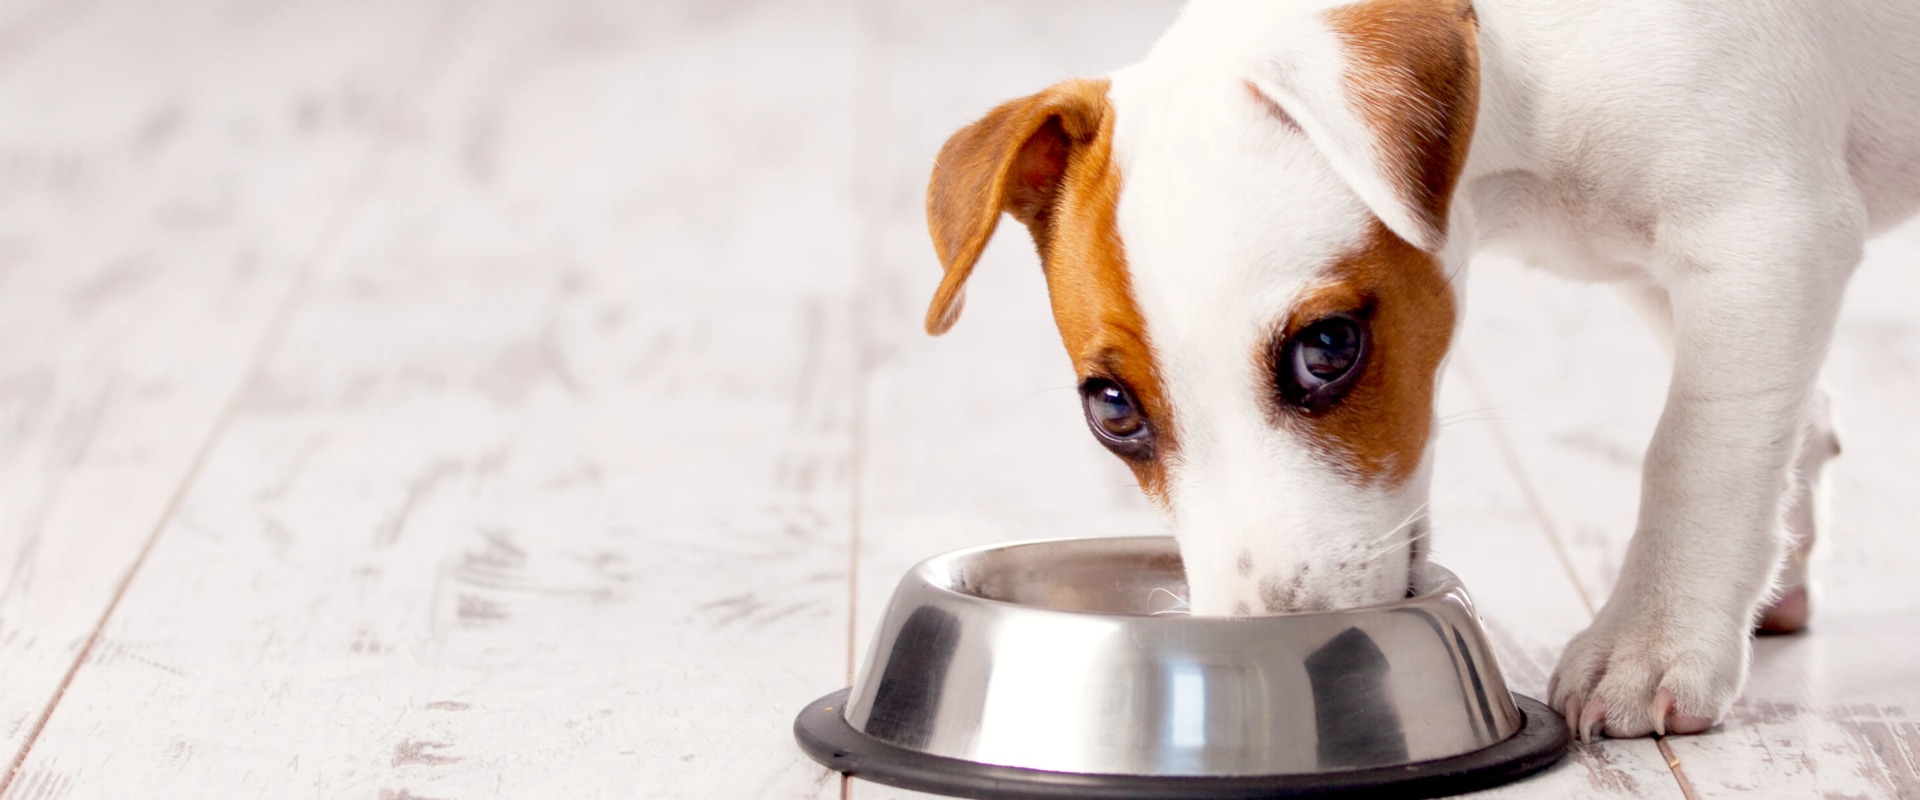 What dog food is recalled right now?